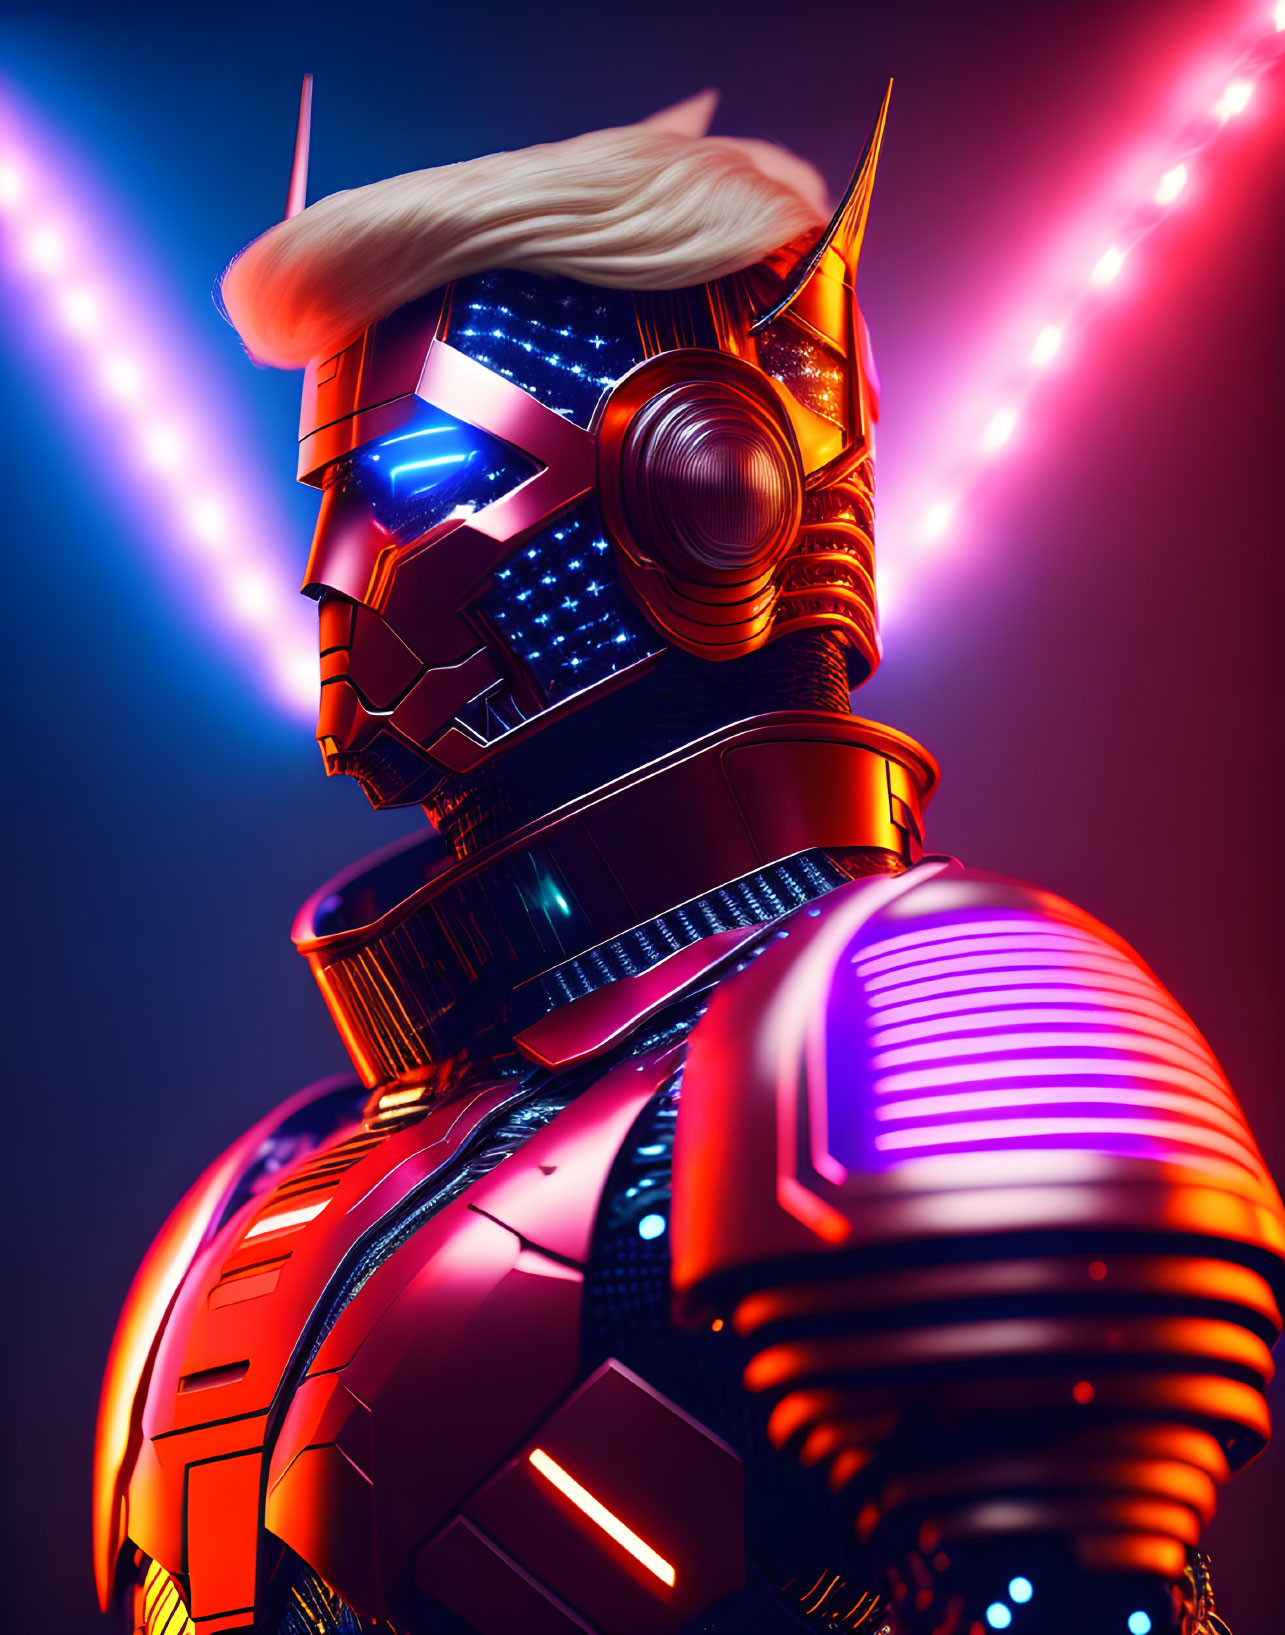 Futuristic warrior robot with glowing eyes and blonde hair in neon-lit setting